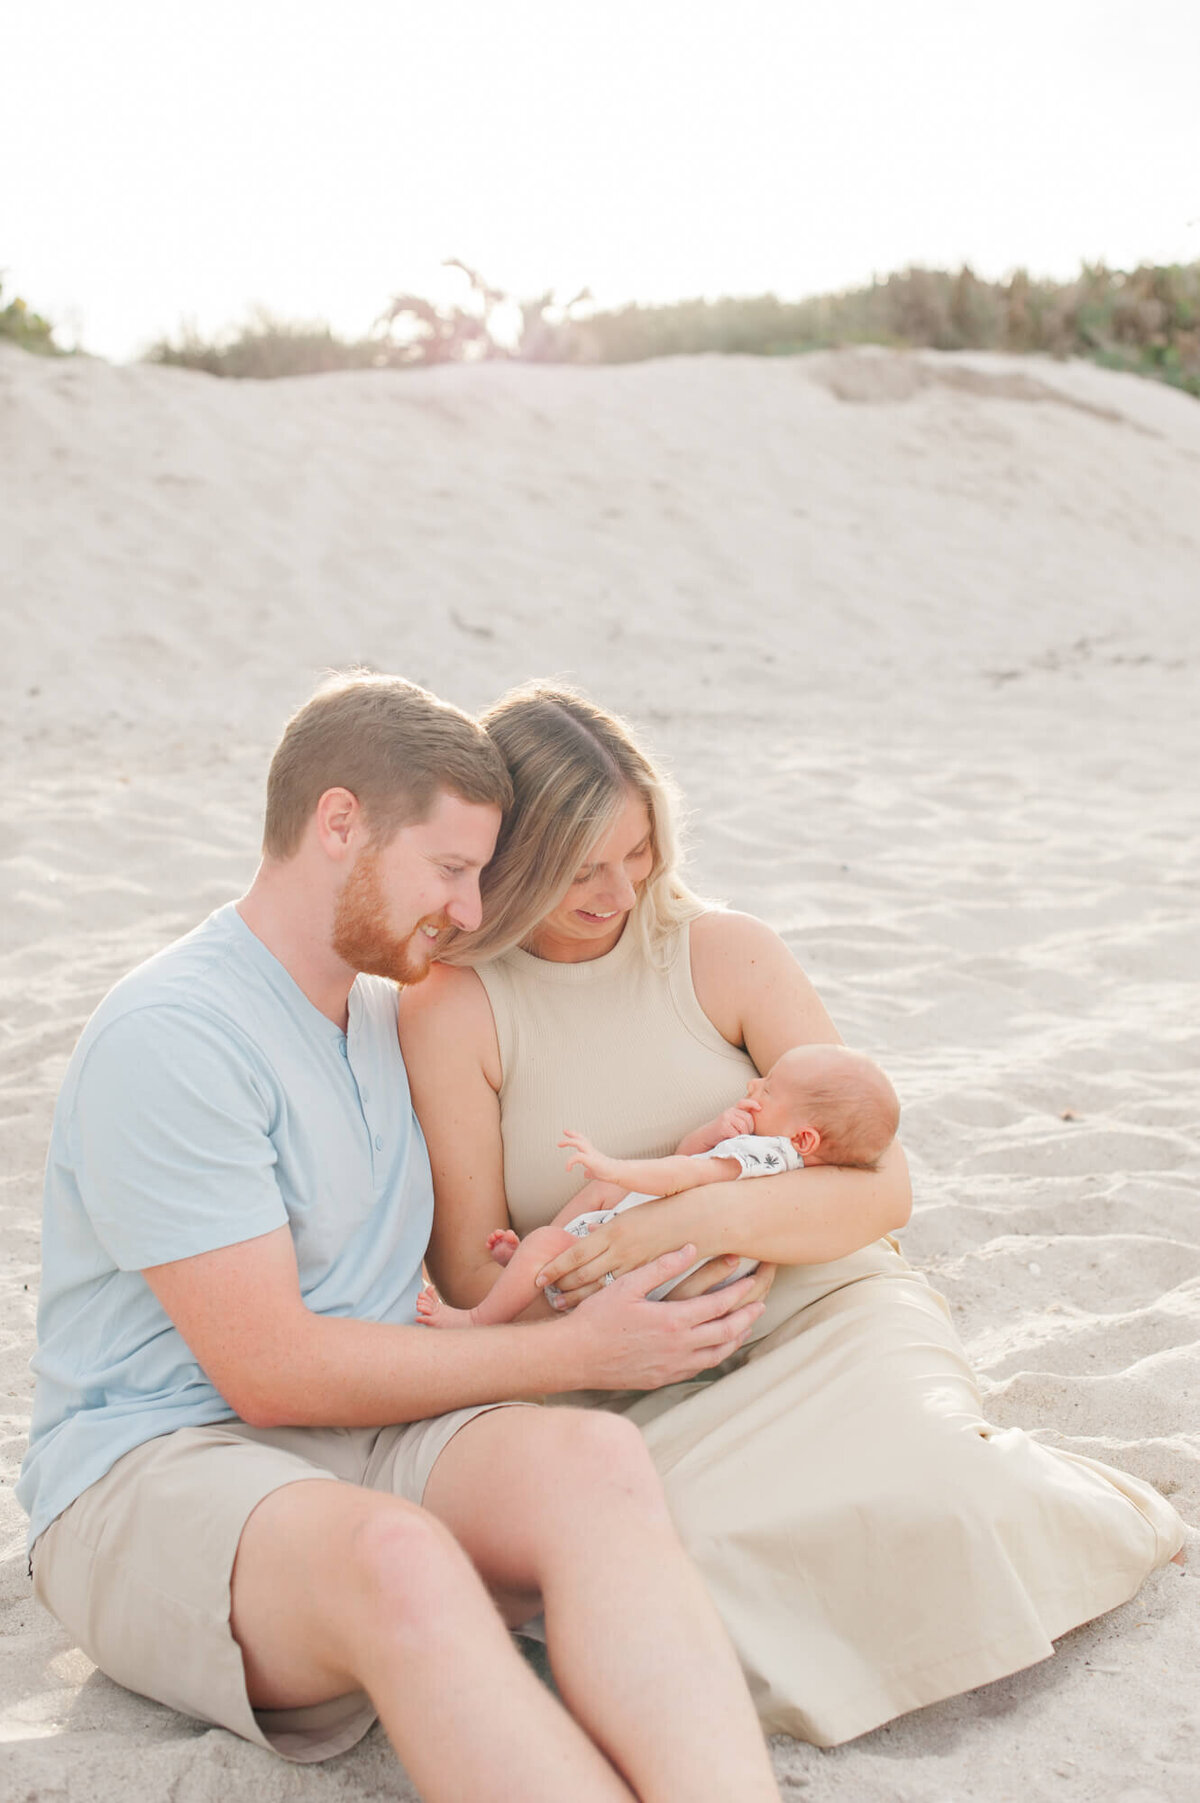 New parents sit in the sand holding their newborn son at golden hour